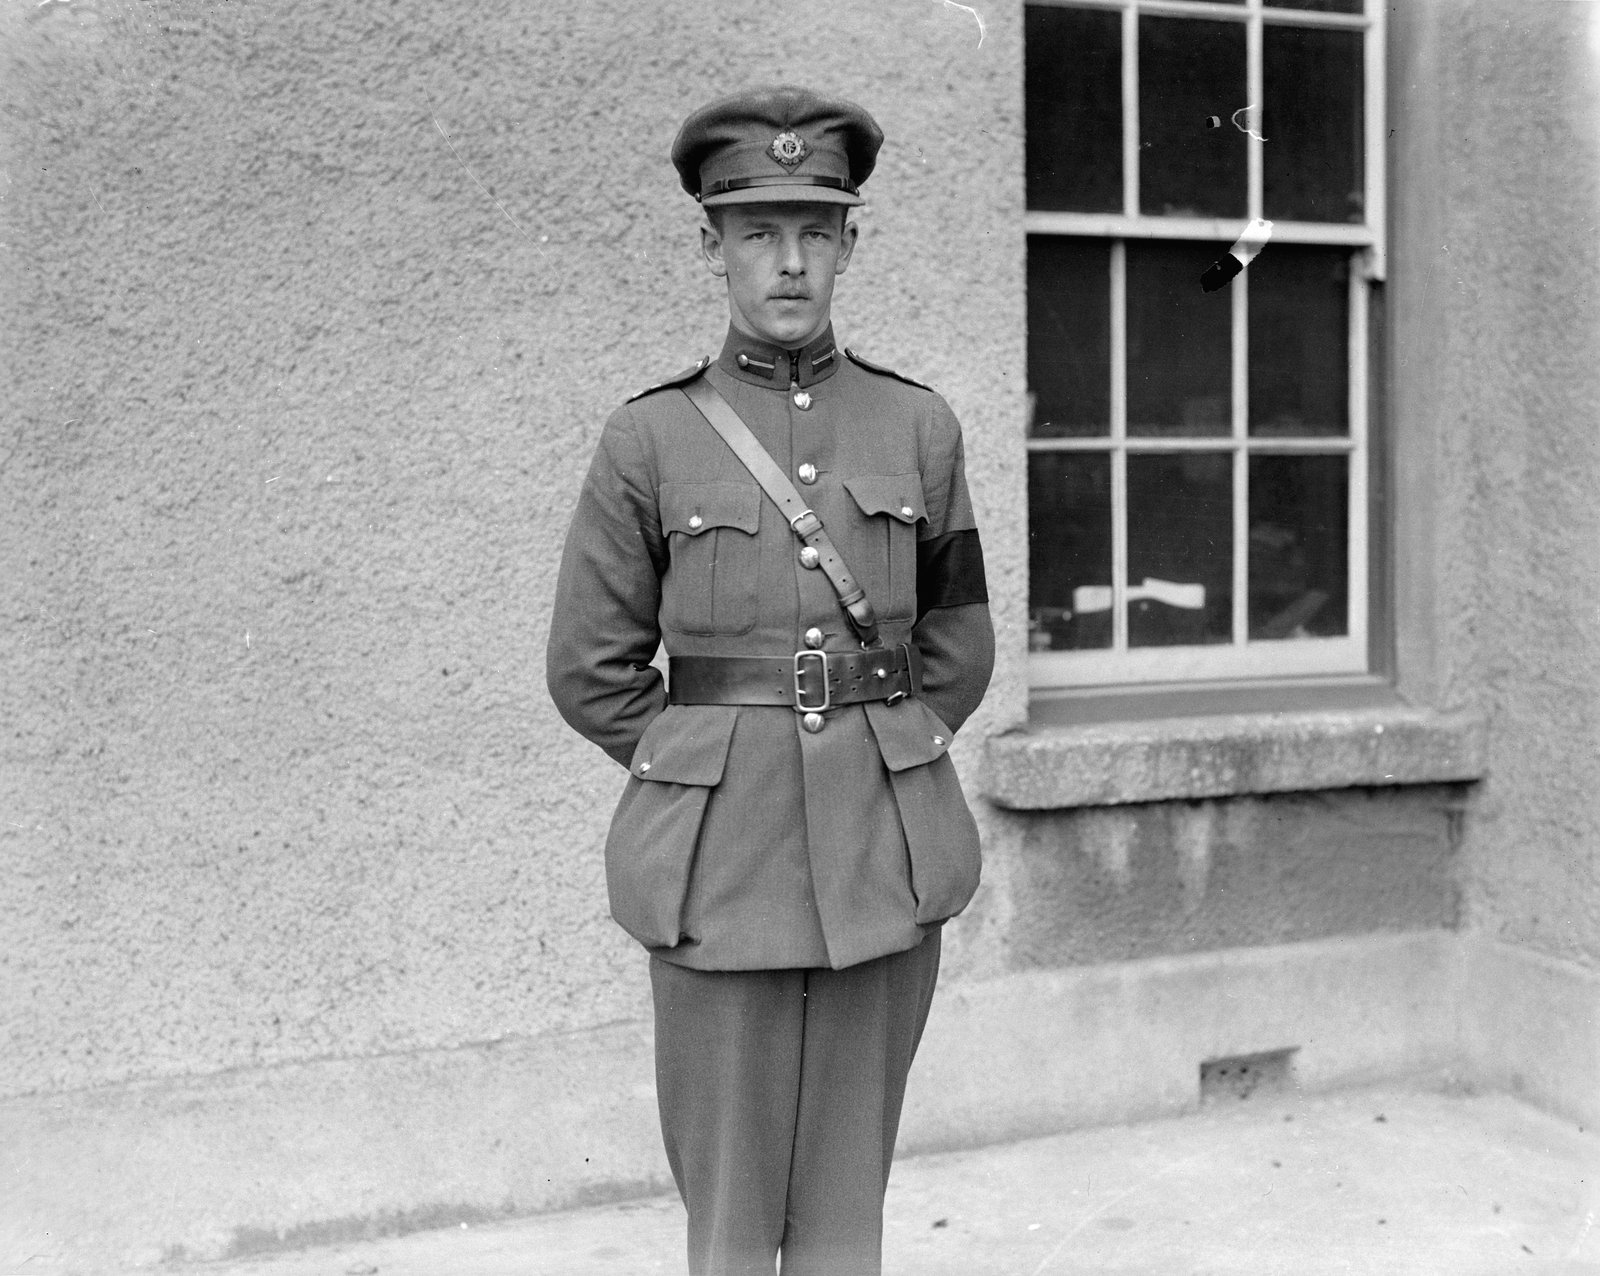 Image - Emmet Dalton at City Hall Dublin in 1922. Photo: Central Press/Getty Images